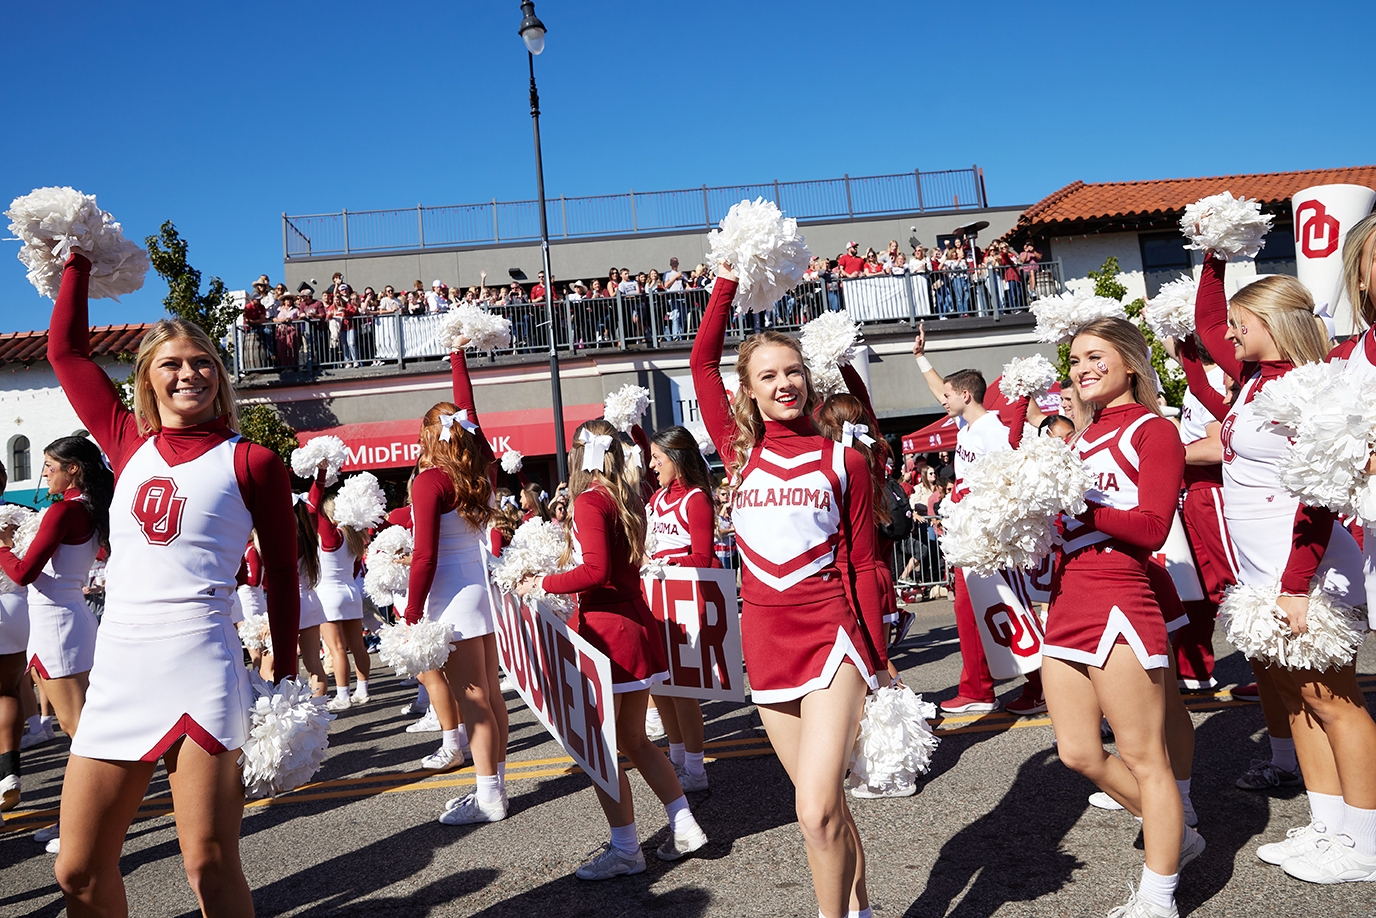 OU Pom performs at the parade down Boyd street